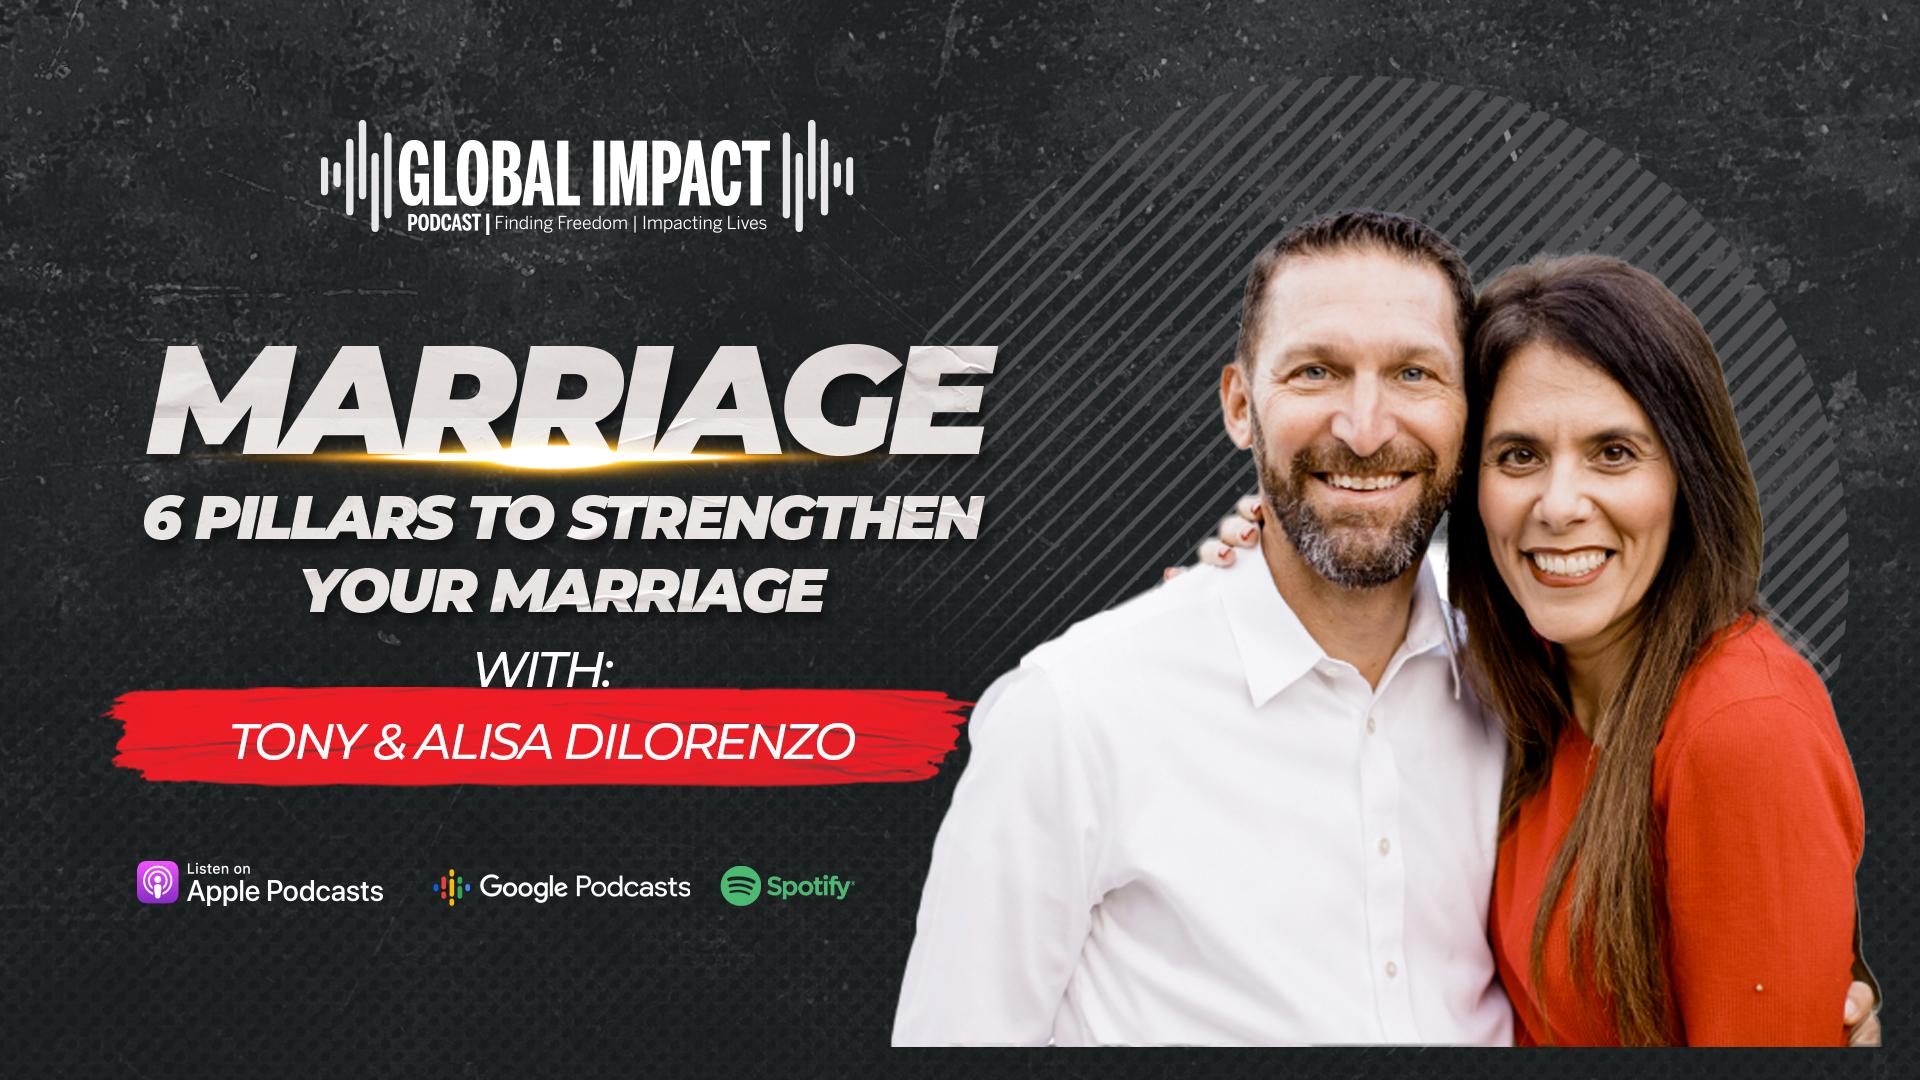 Episode 47 | Marriage: 6 Pillars to Strengthen Your Marriage with Tony and Alisa Dilorenzo